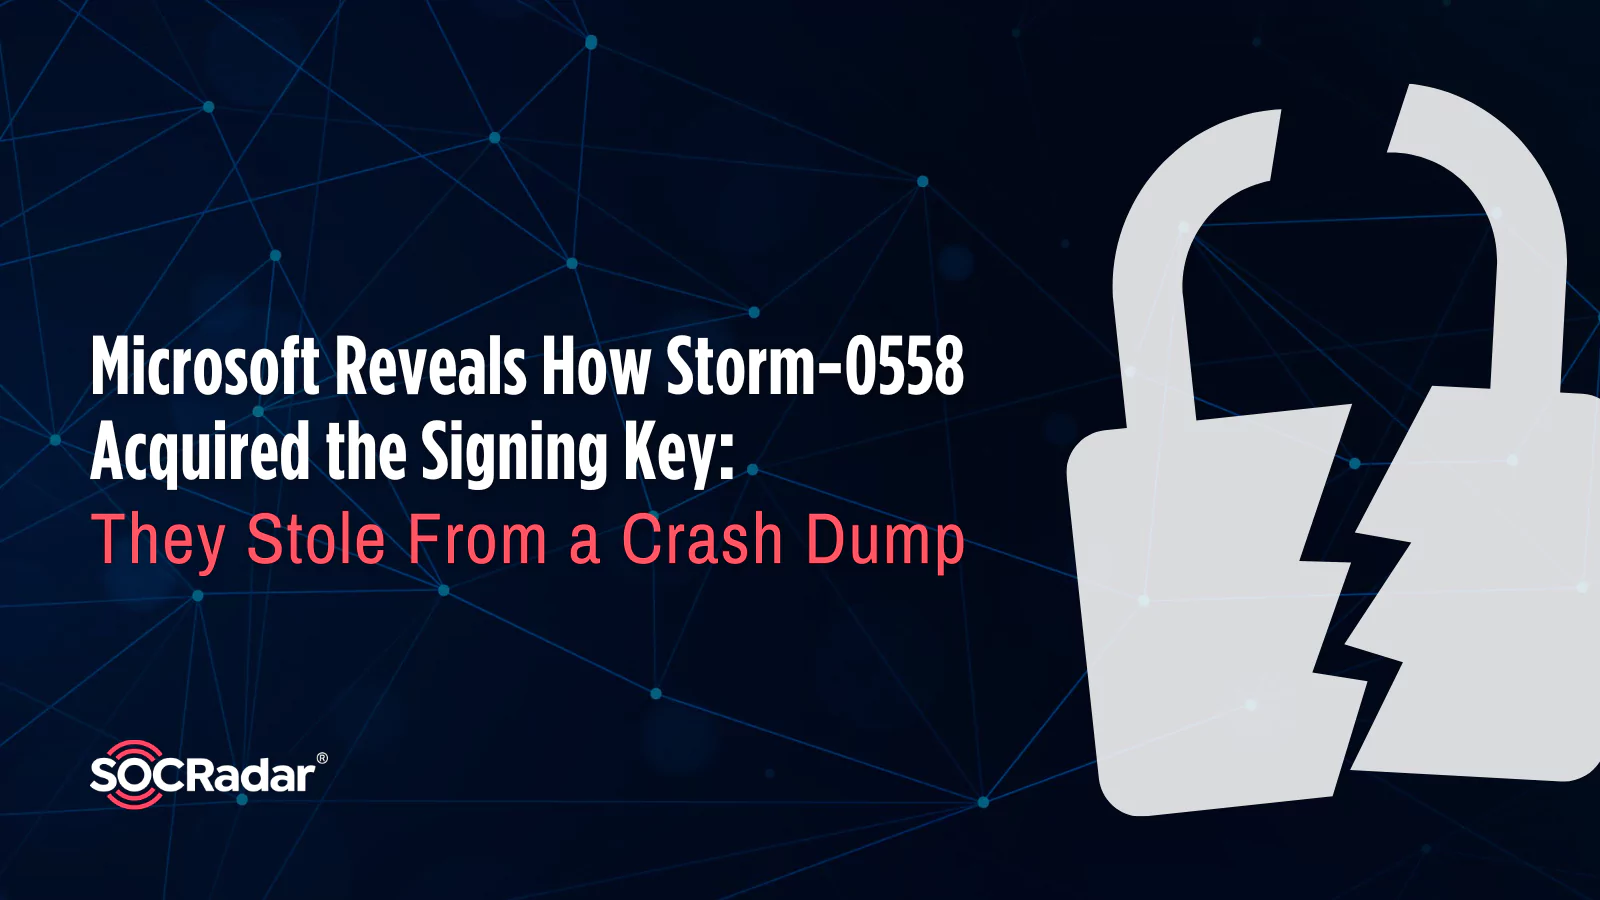 SOCRadar® Cyber Intelligence Inc. | Microsoft Reveals How Storm-0558 Acquired the Signing Key: They Stole From a Crash Dump